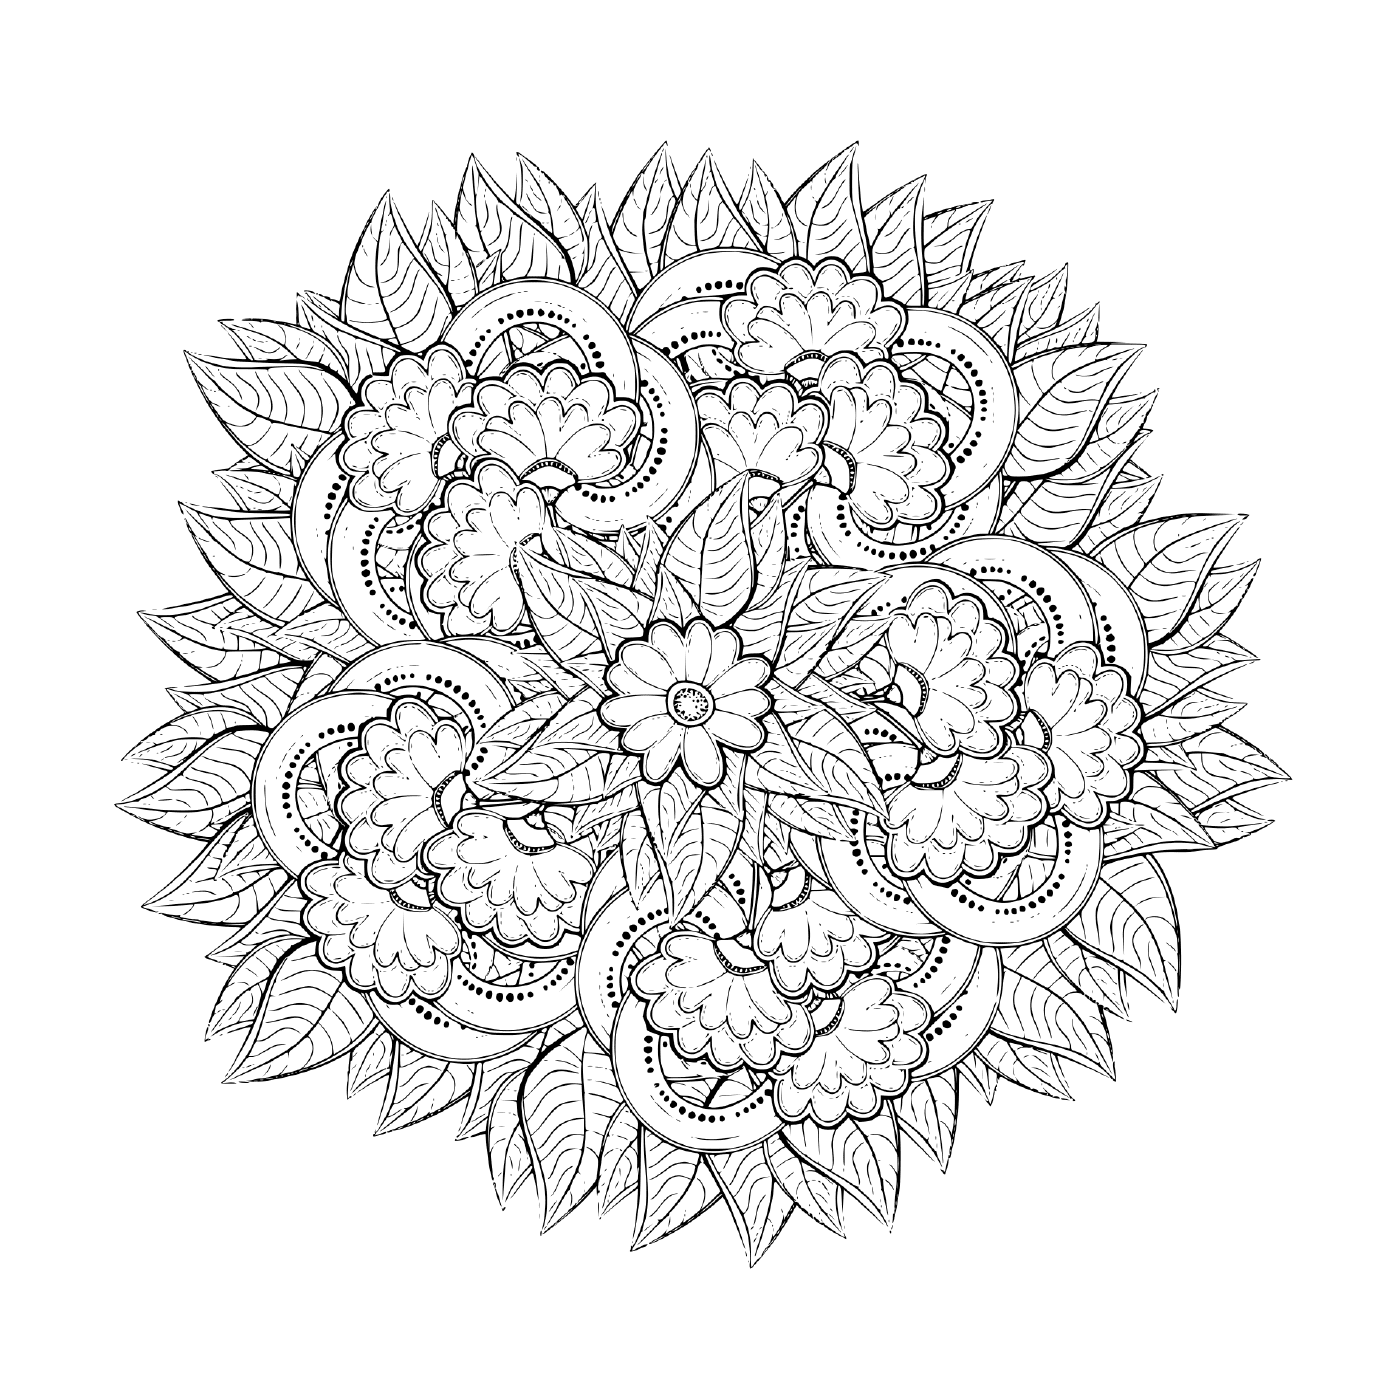  A floral mandala for adults 